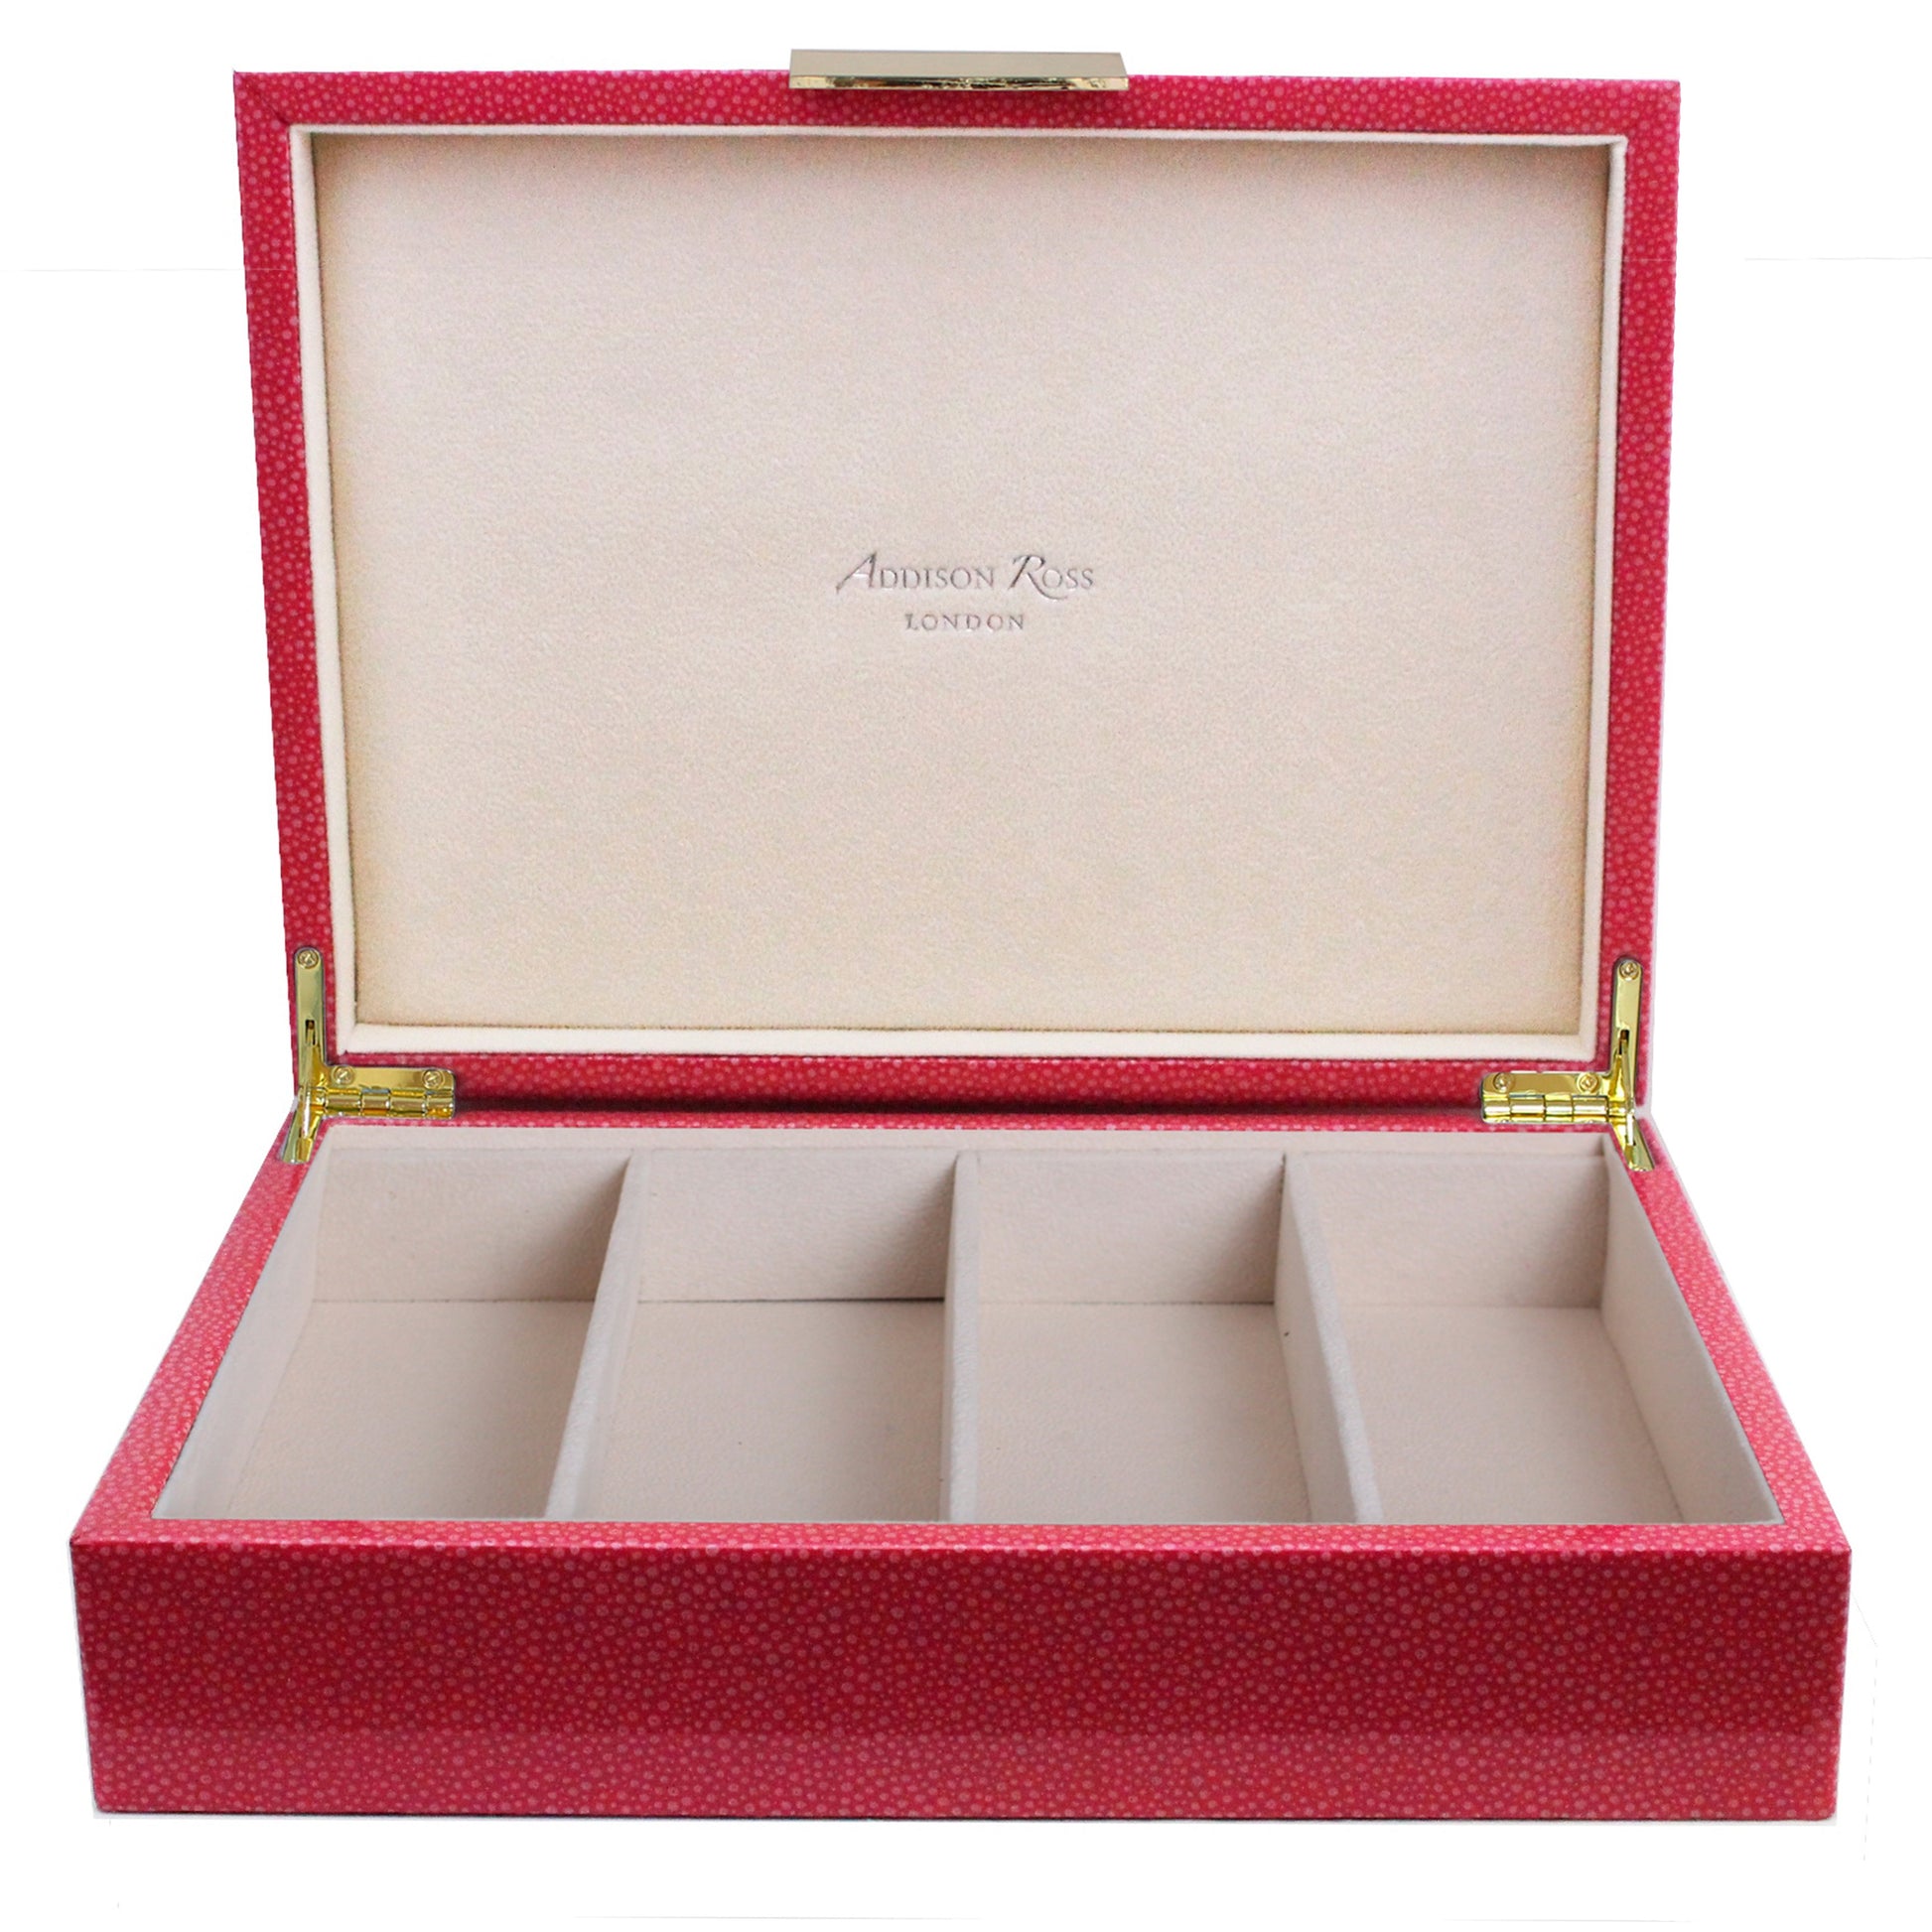 Large pink jewelry box with suede interior